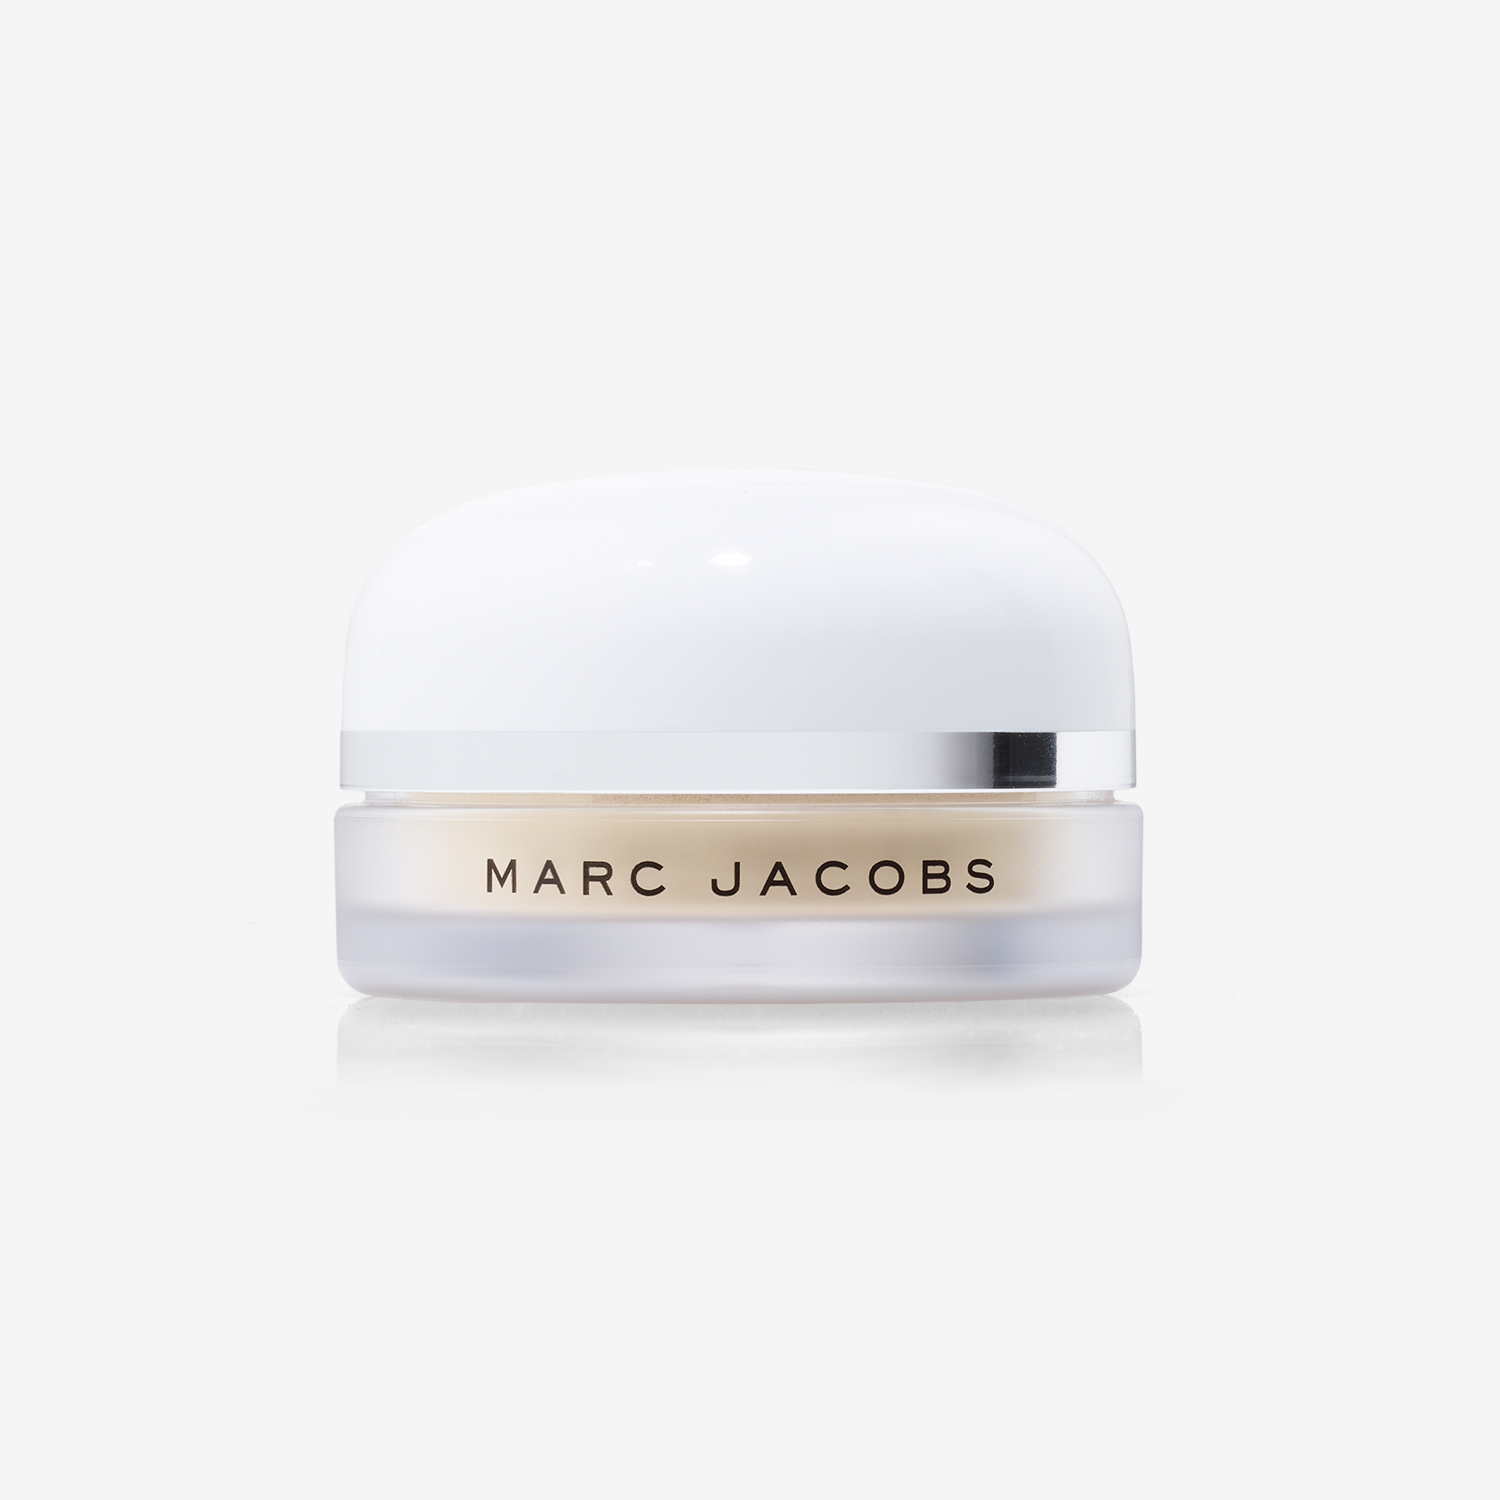 Marc Jacobs Beauty Finish-Line Perfecting Coconut Setting Powder